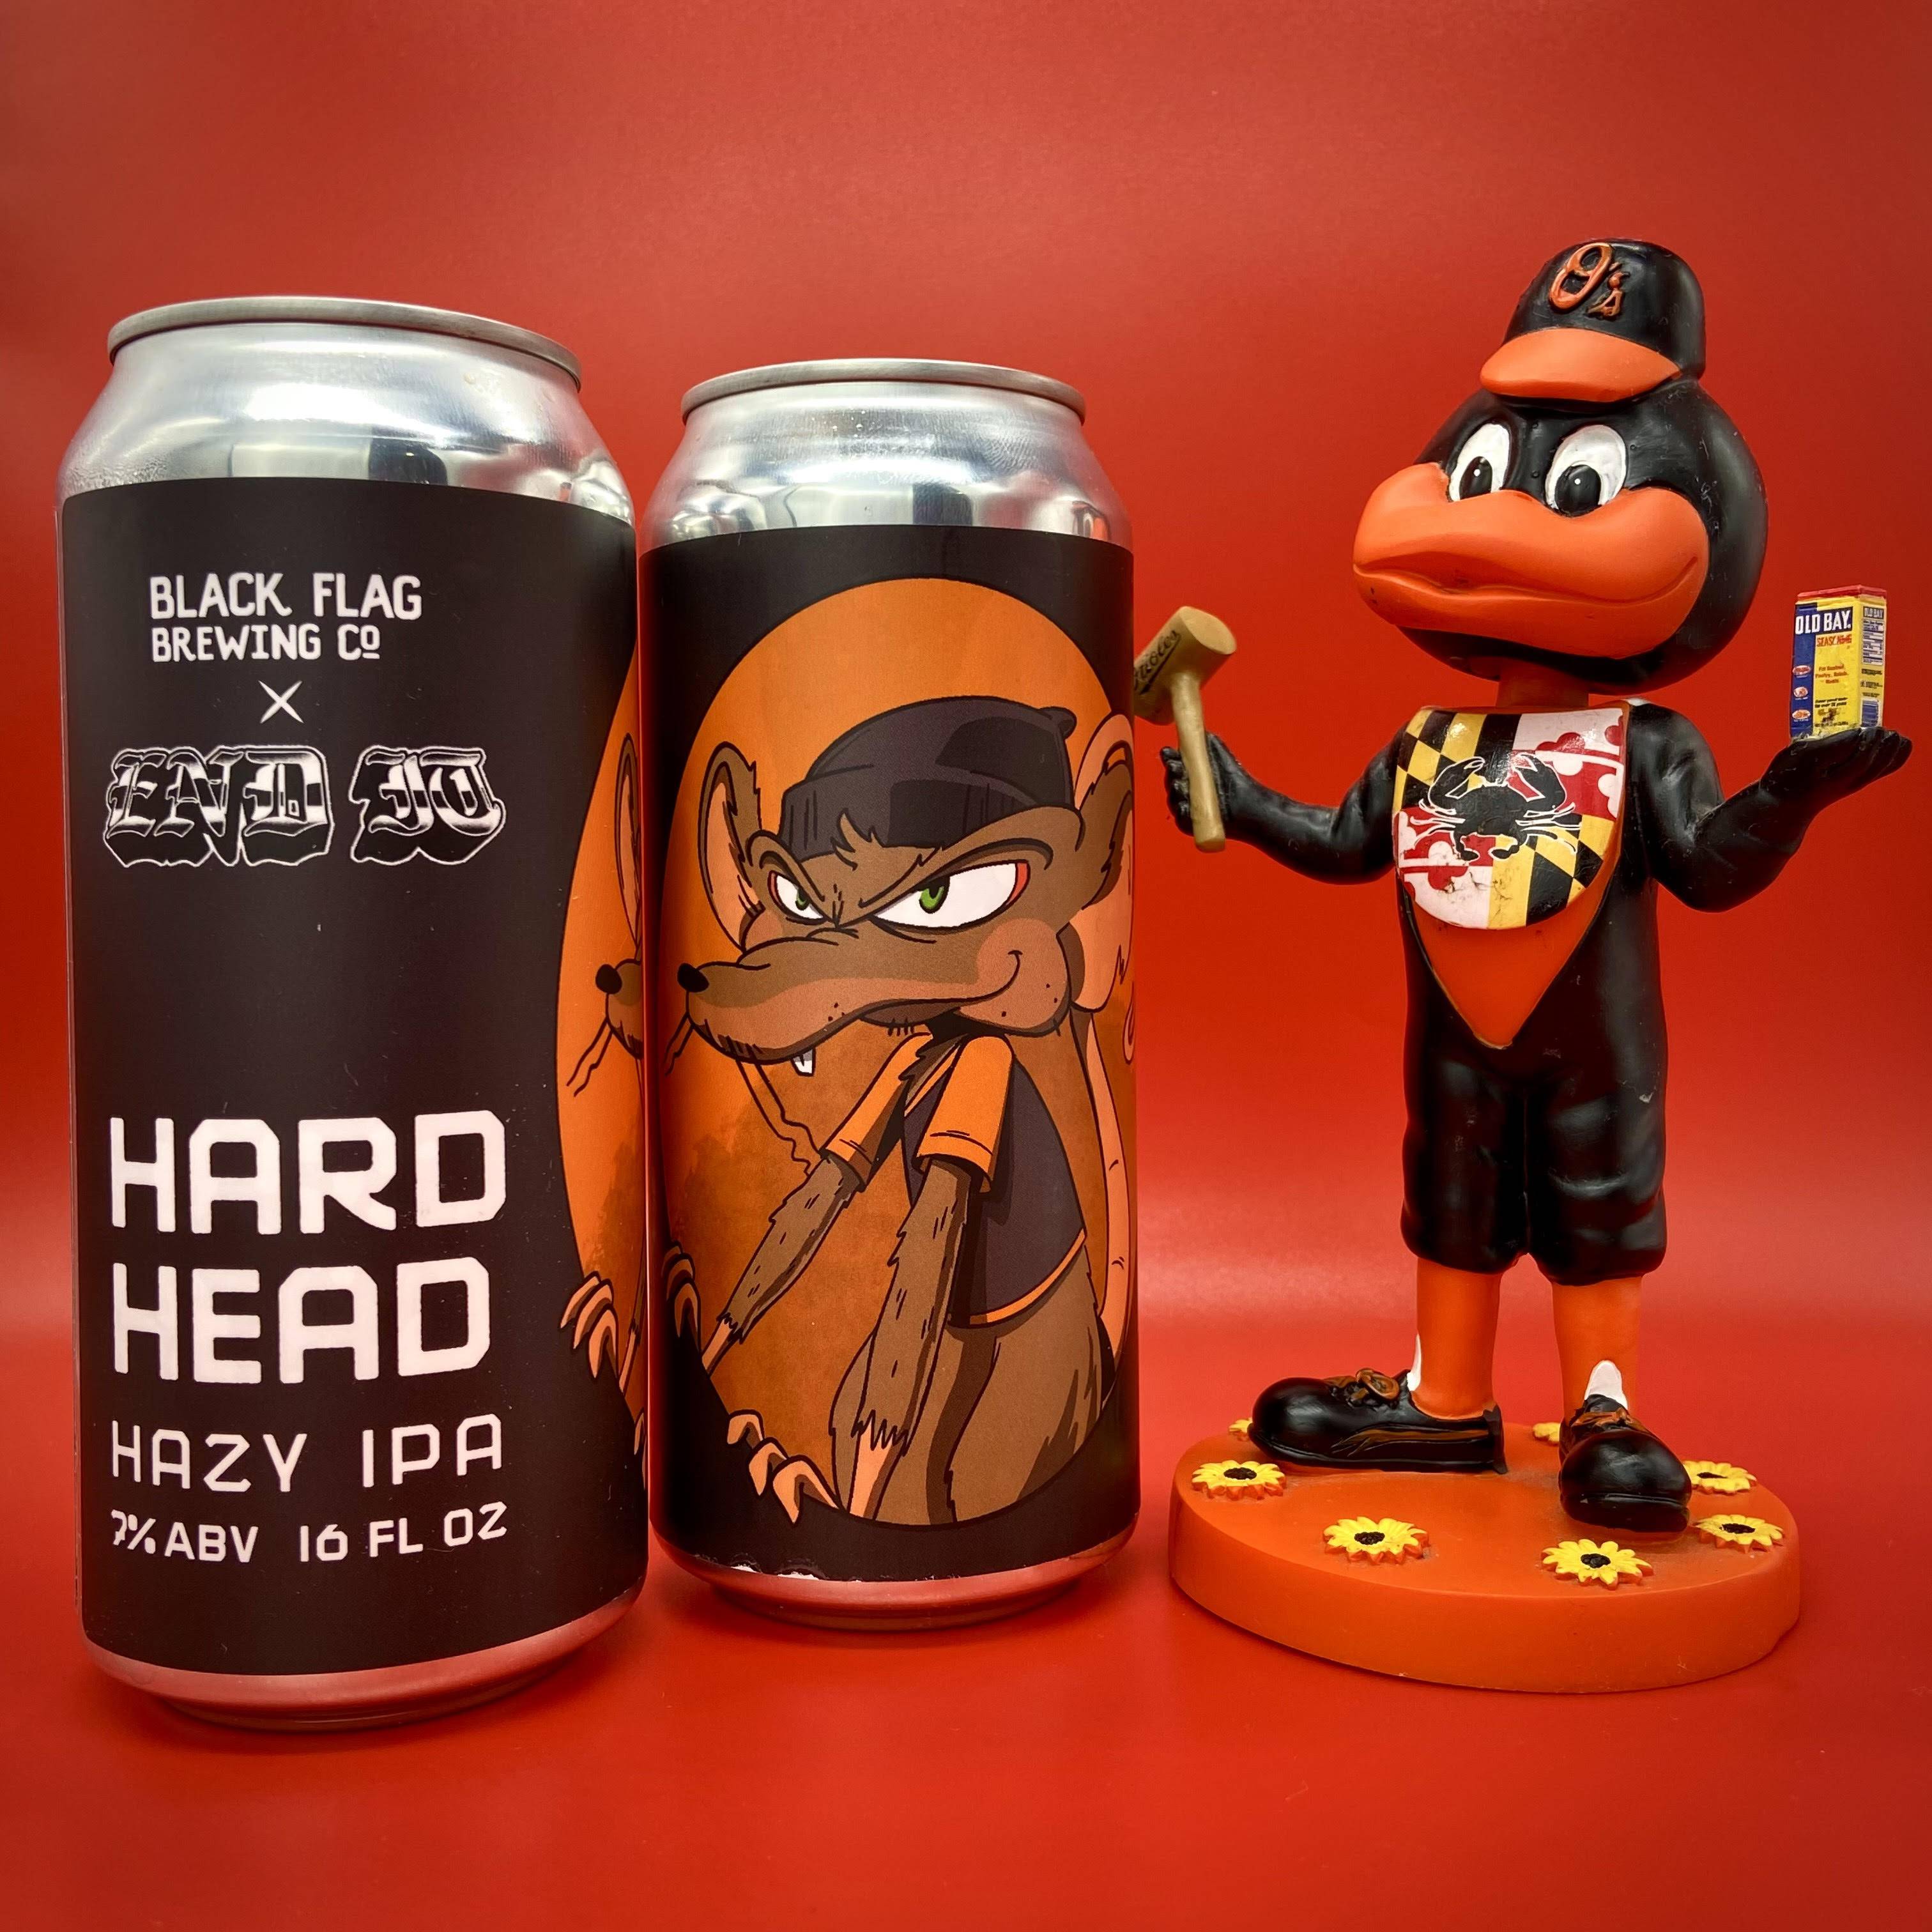 Two cans of the Hard Head hazy IPA from Black Flag Brewing Co. are pictured next to a a bobblehead of the Oriole Bird holding a mallet and can of Old Bay.